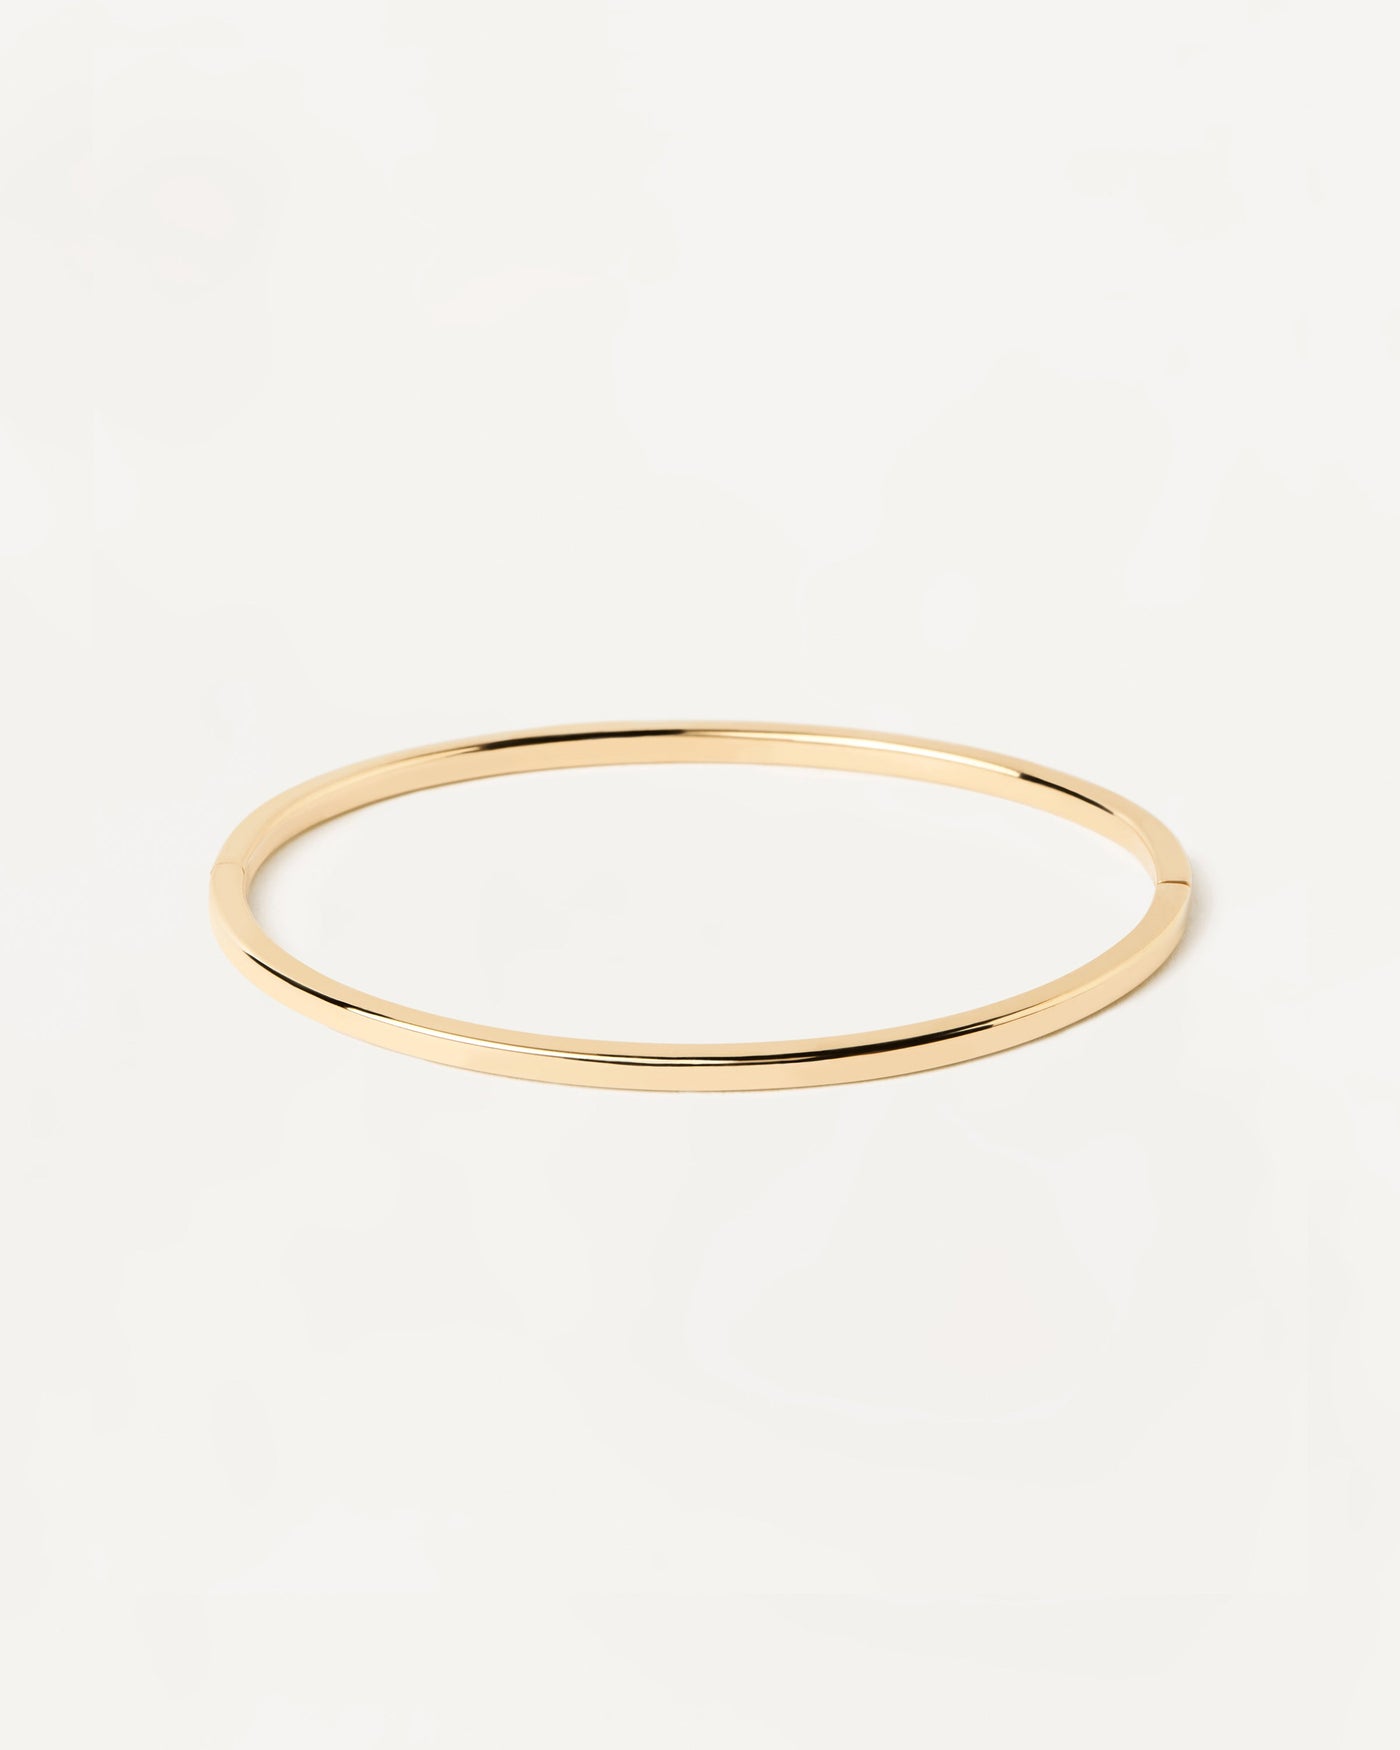 2023 Selection | Gold Core Bangle. 18K solid yellow gold hinged rigid bracelet with basic plain design. Get the latest arrival from PDPAOLA. Place your order safely and get this Best Seller. Free Shipping.